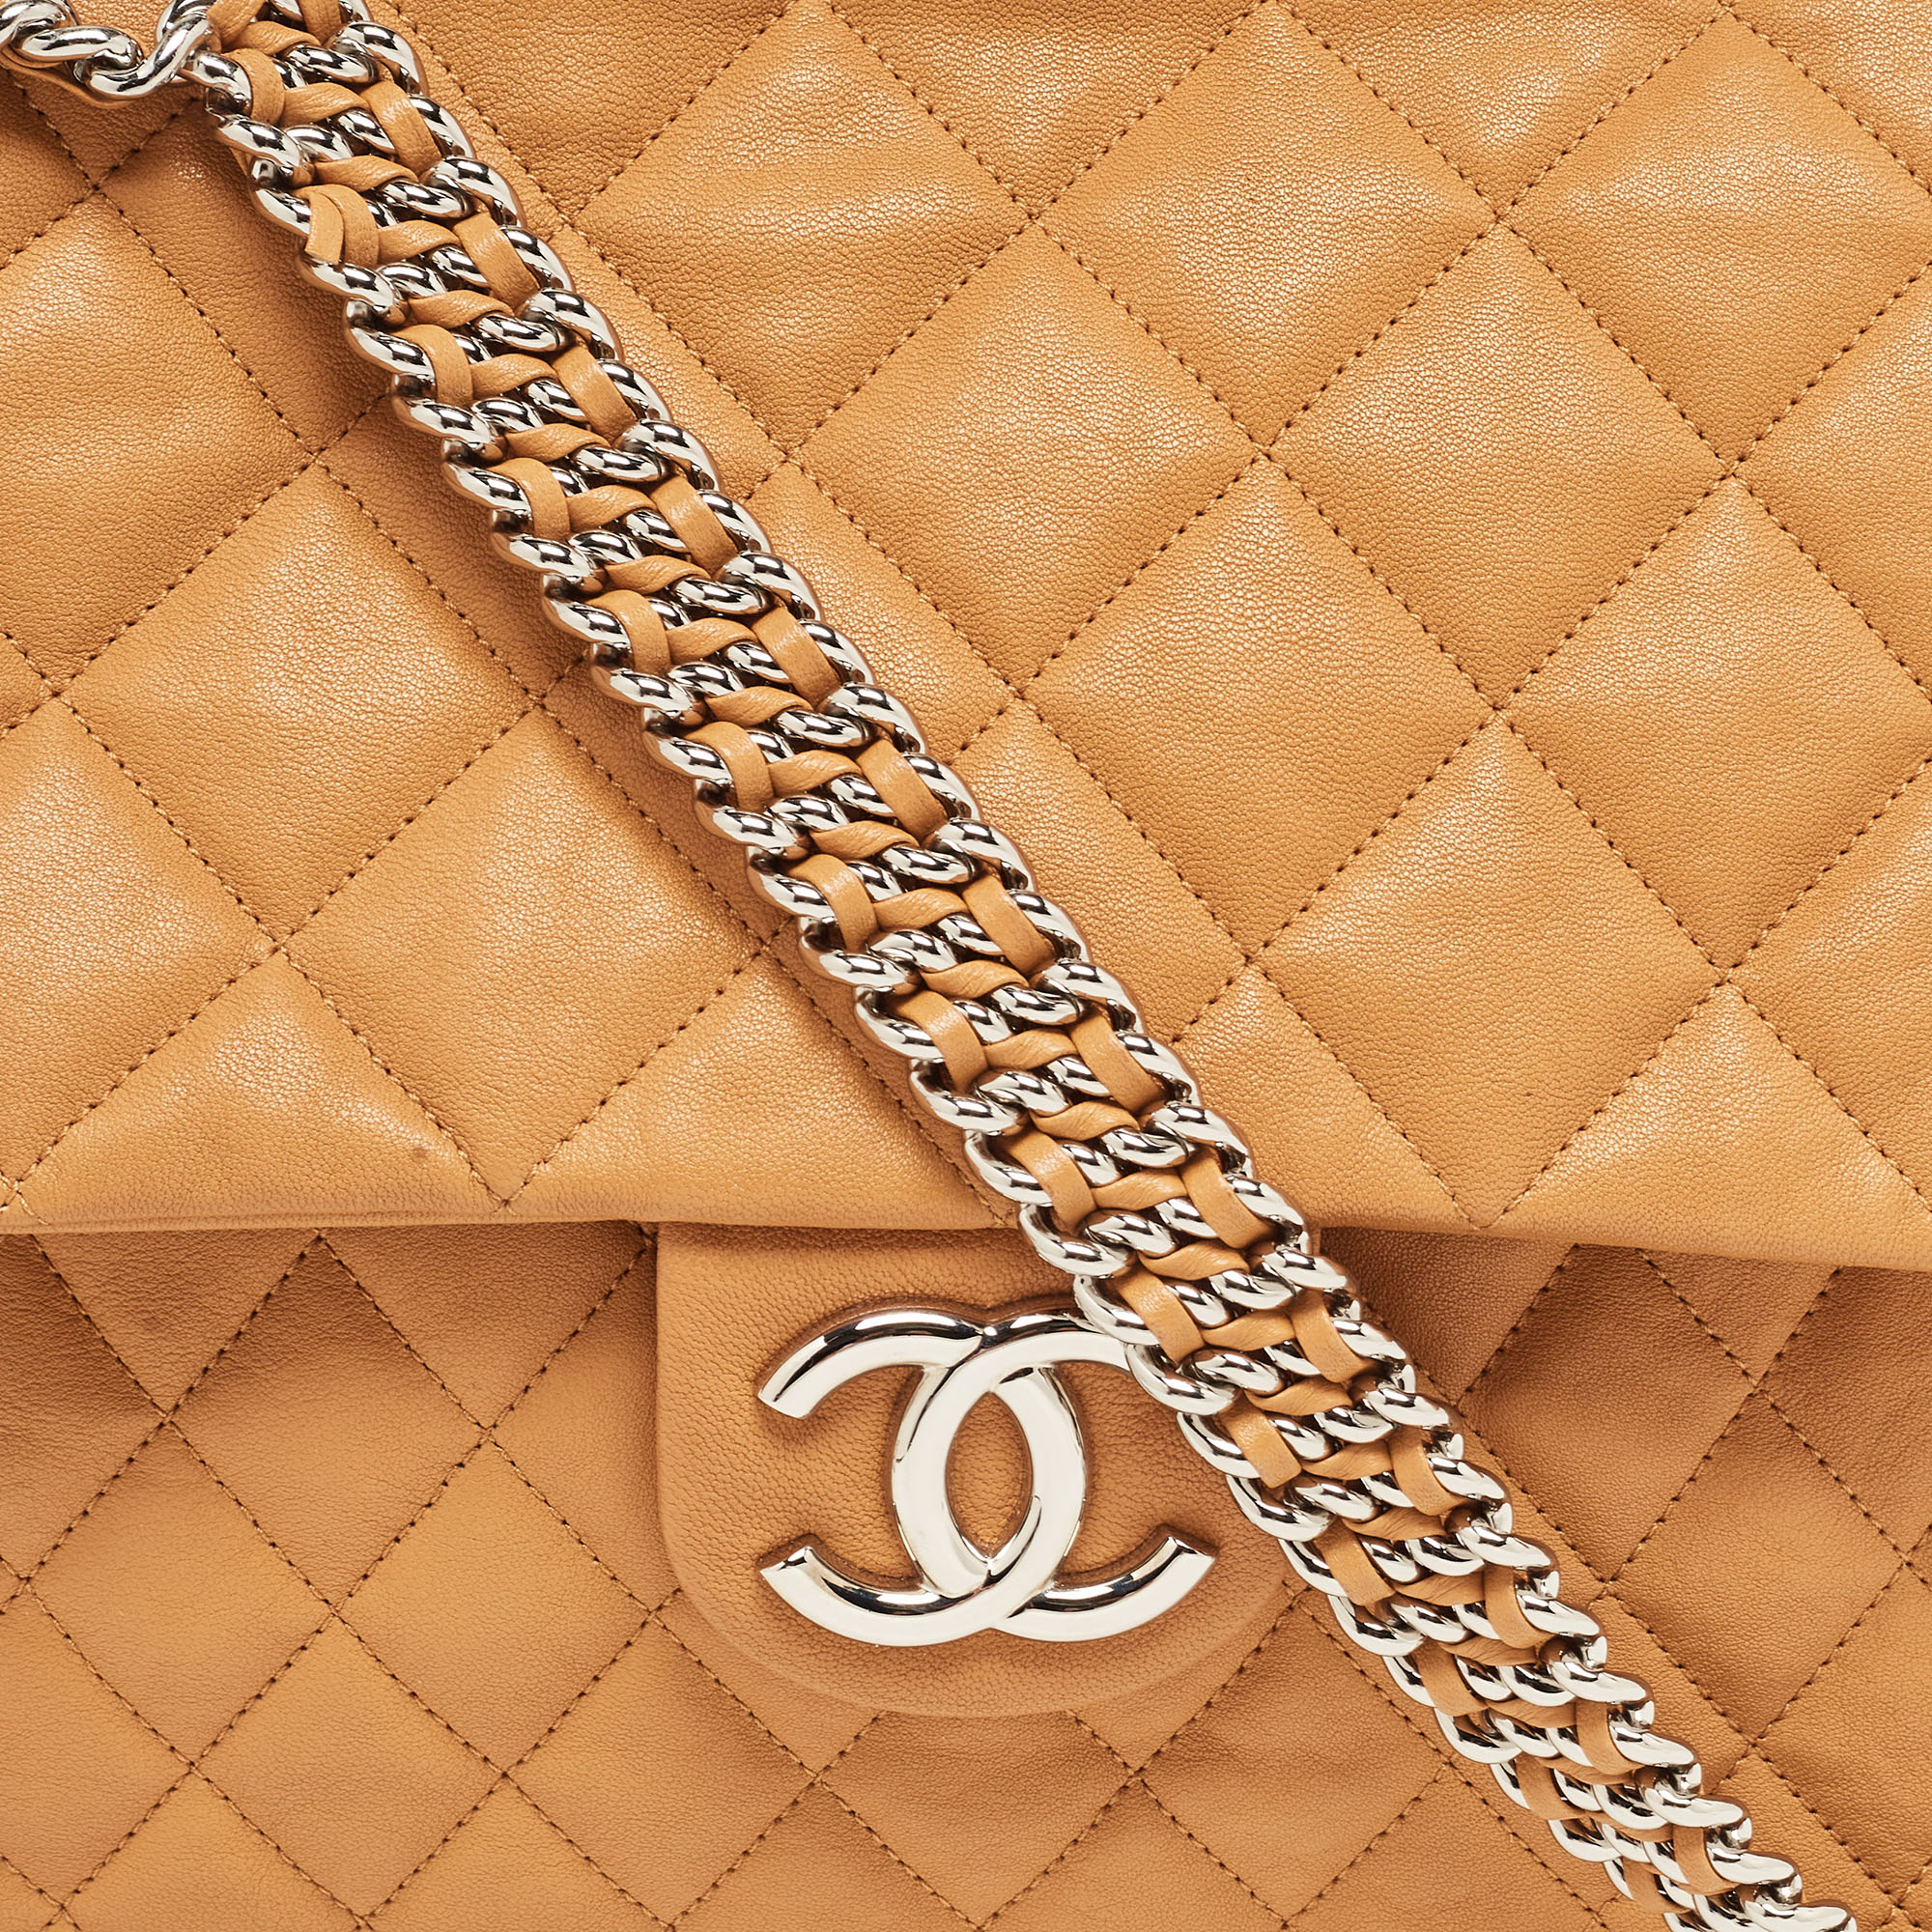 Chanel Brown Quilted Leather Maxi Chain Around Flap Bag